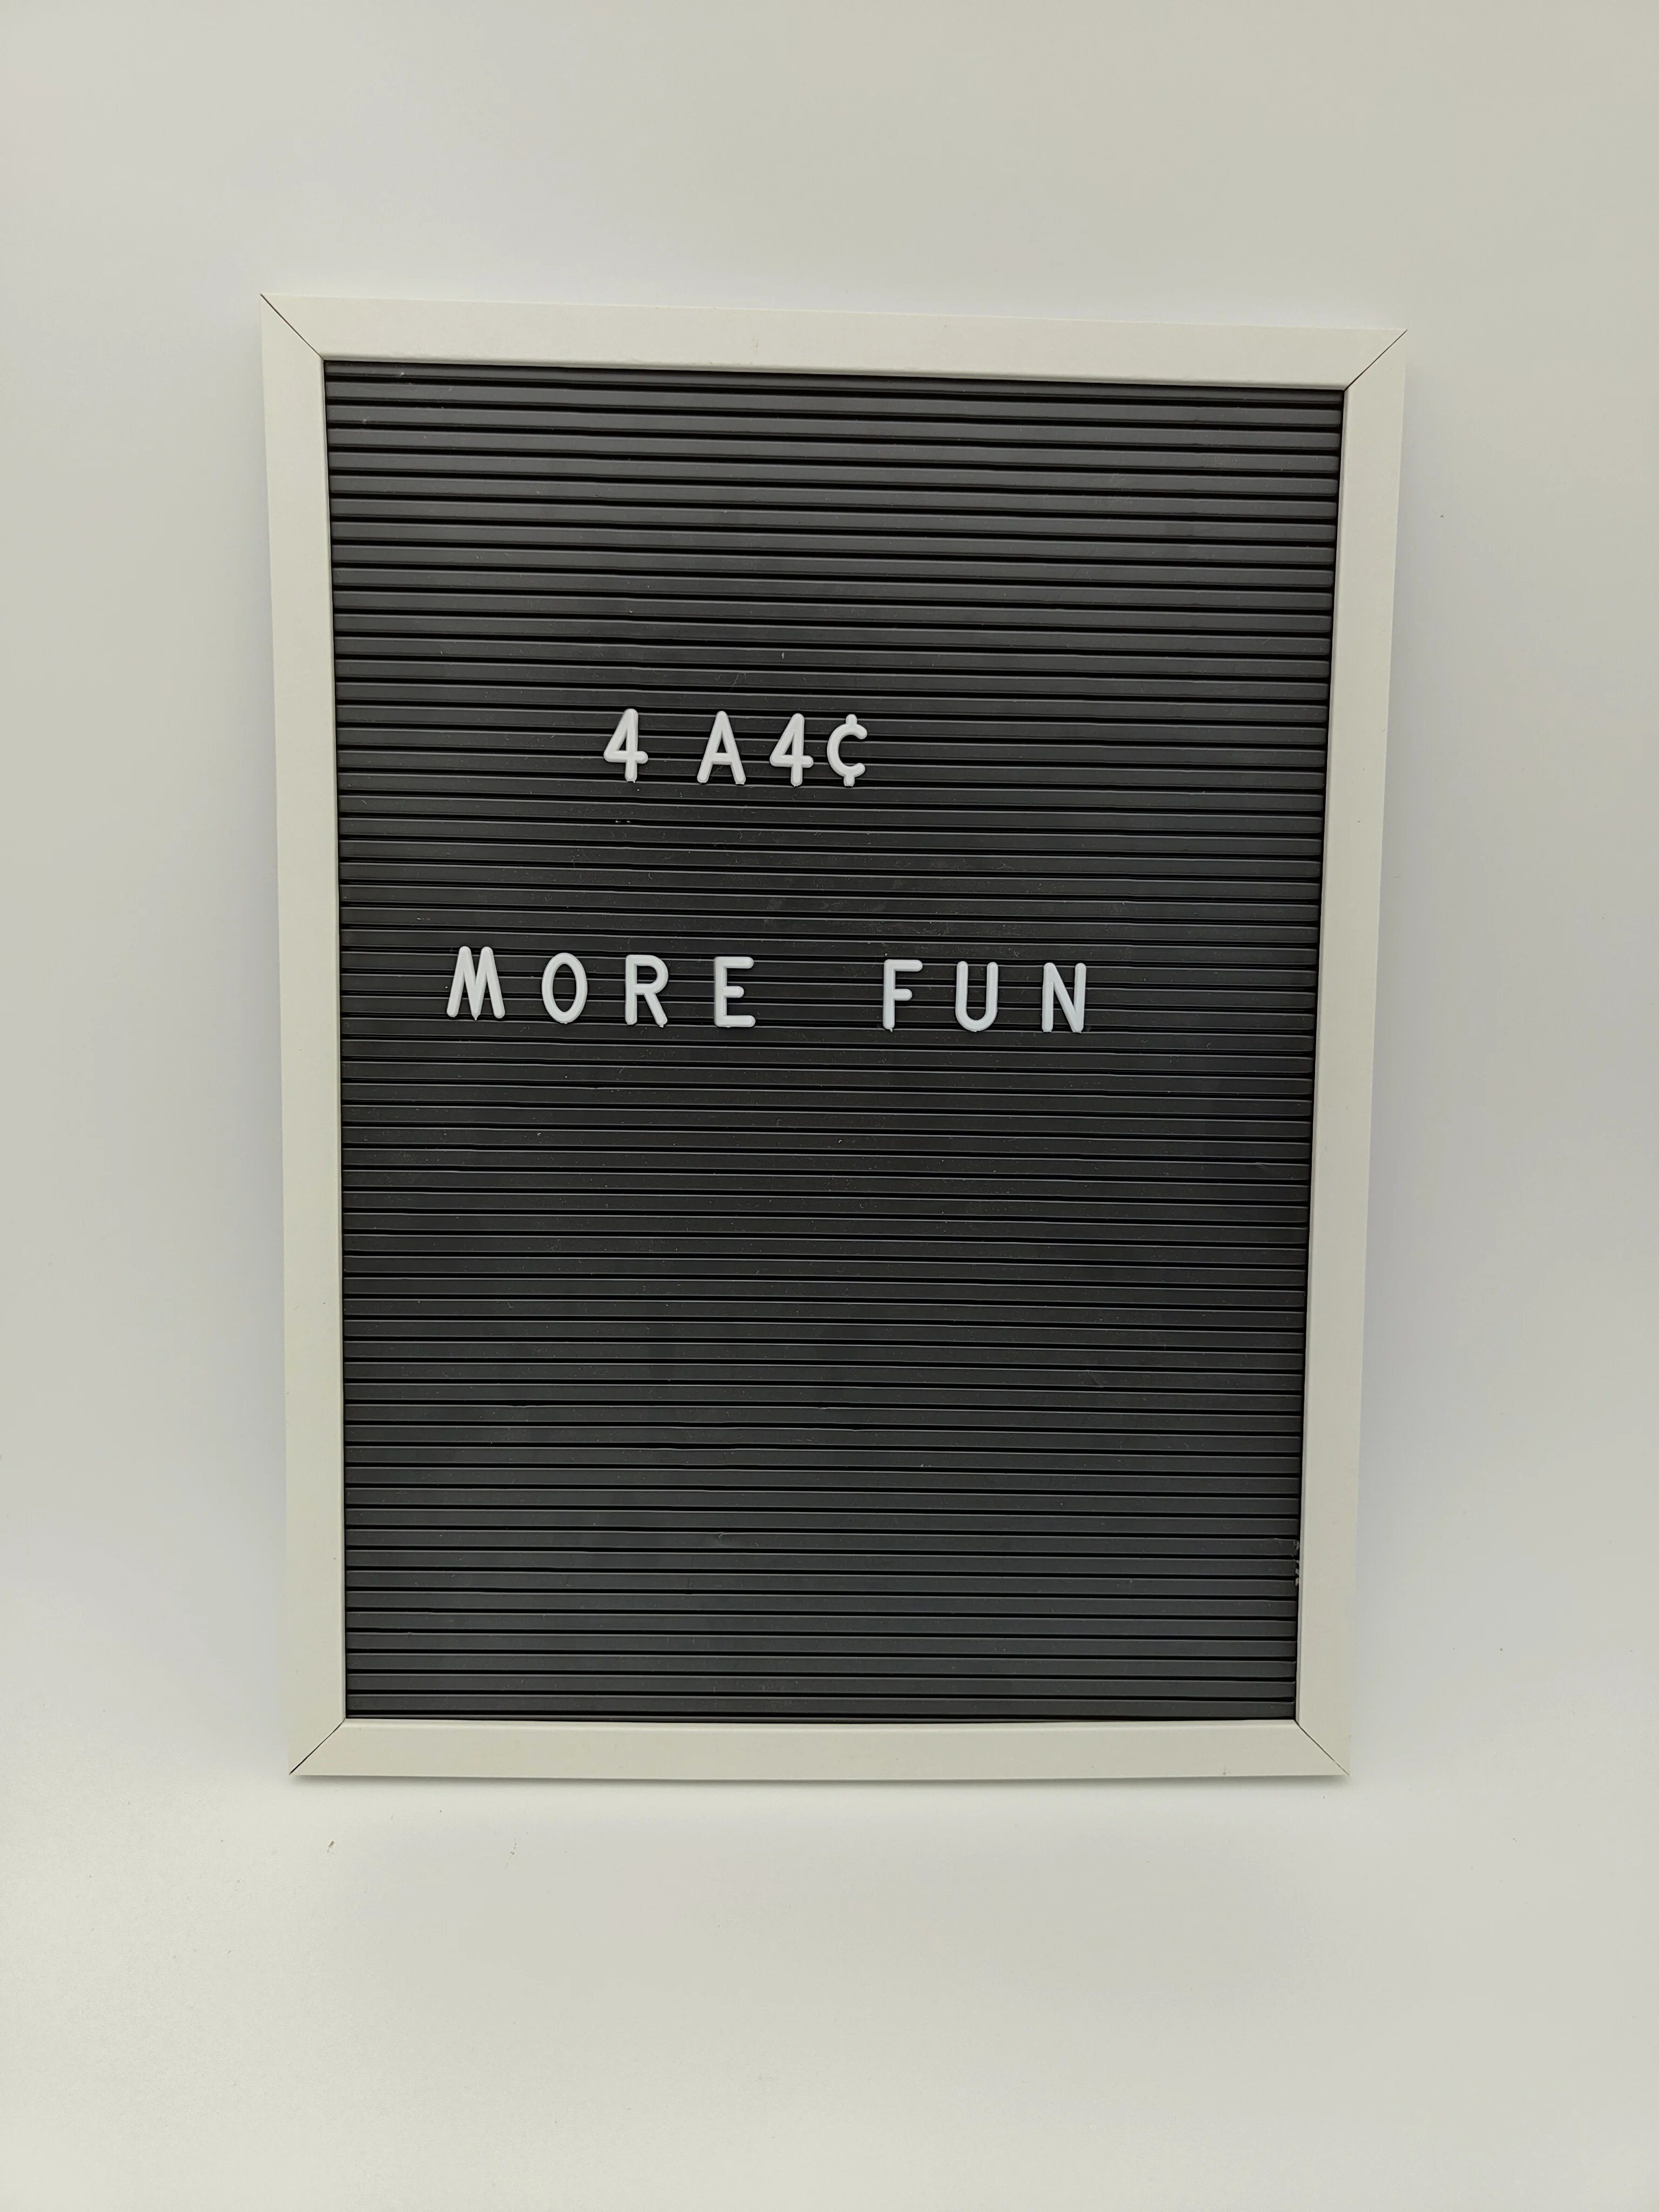 6 pcs directly factory 12x16 inch education black kids educational whiteboards